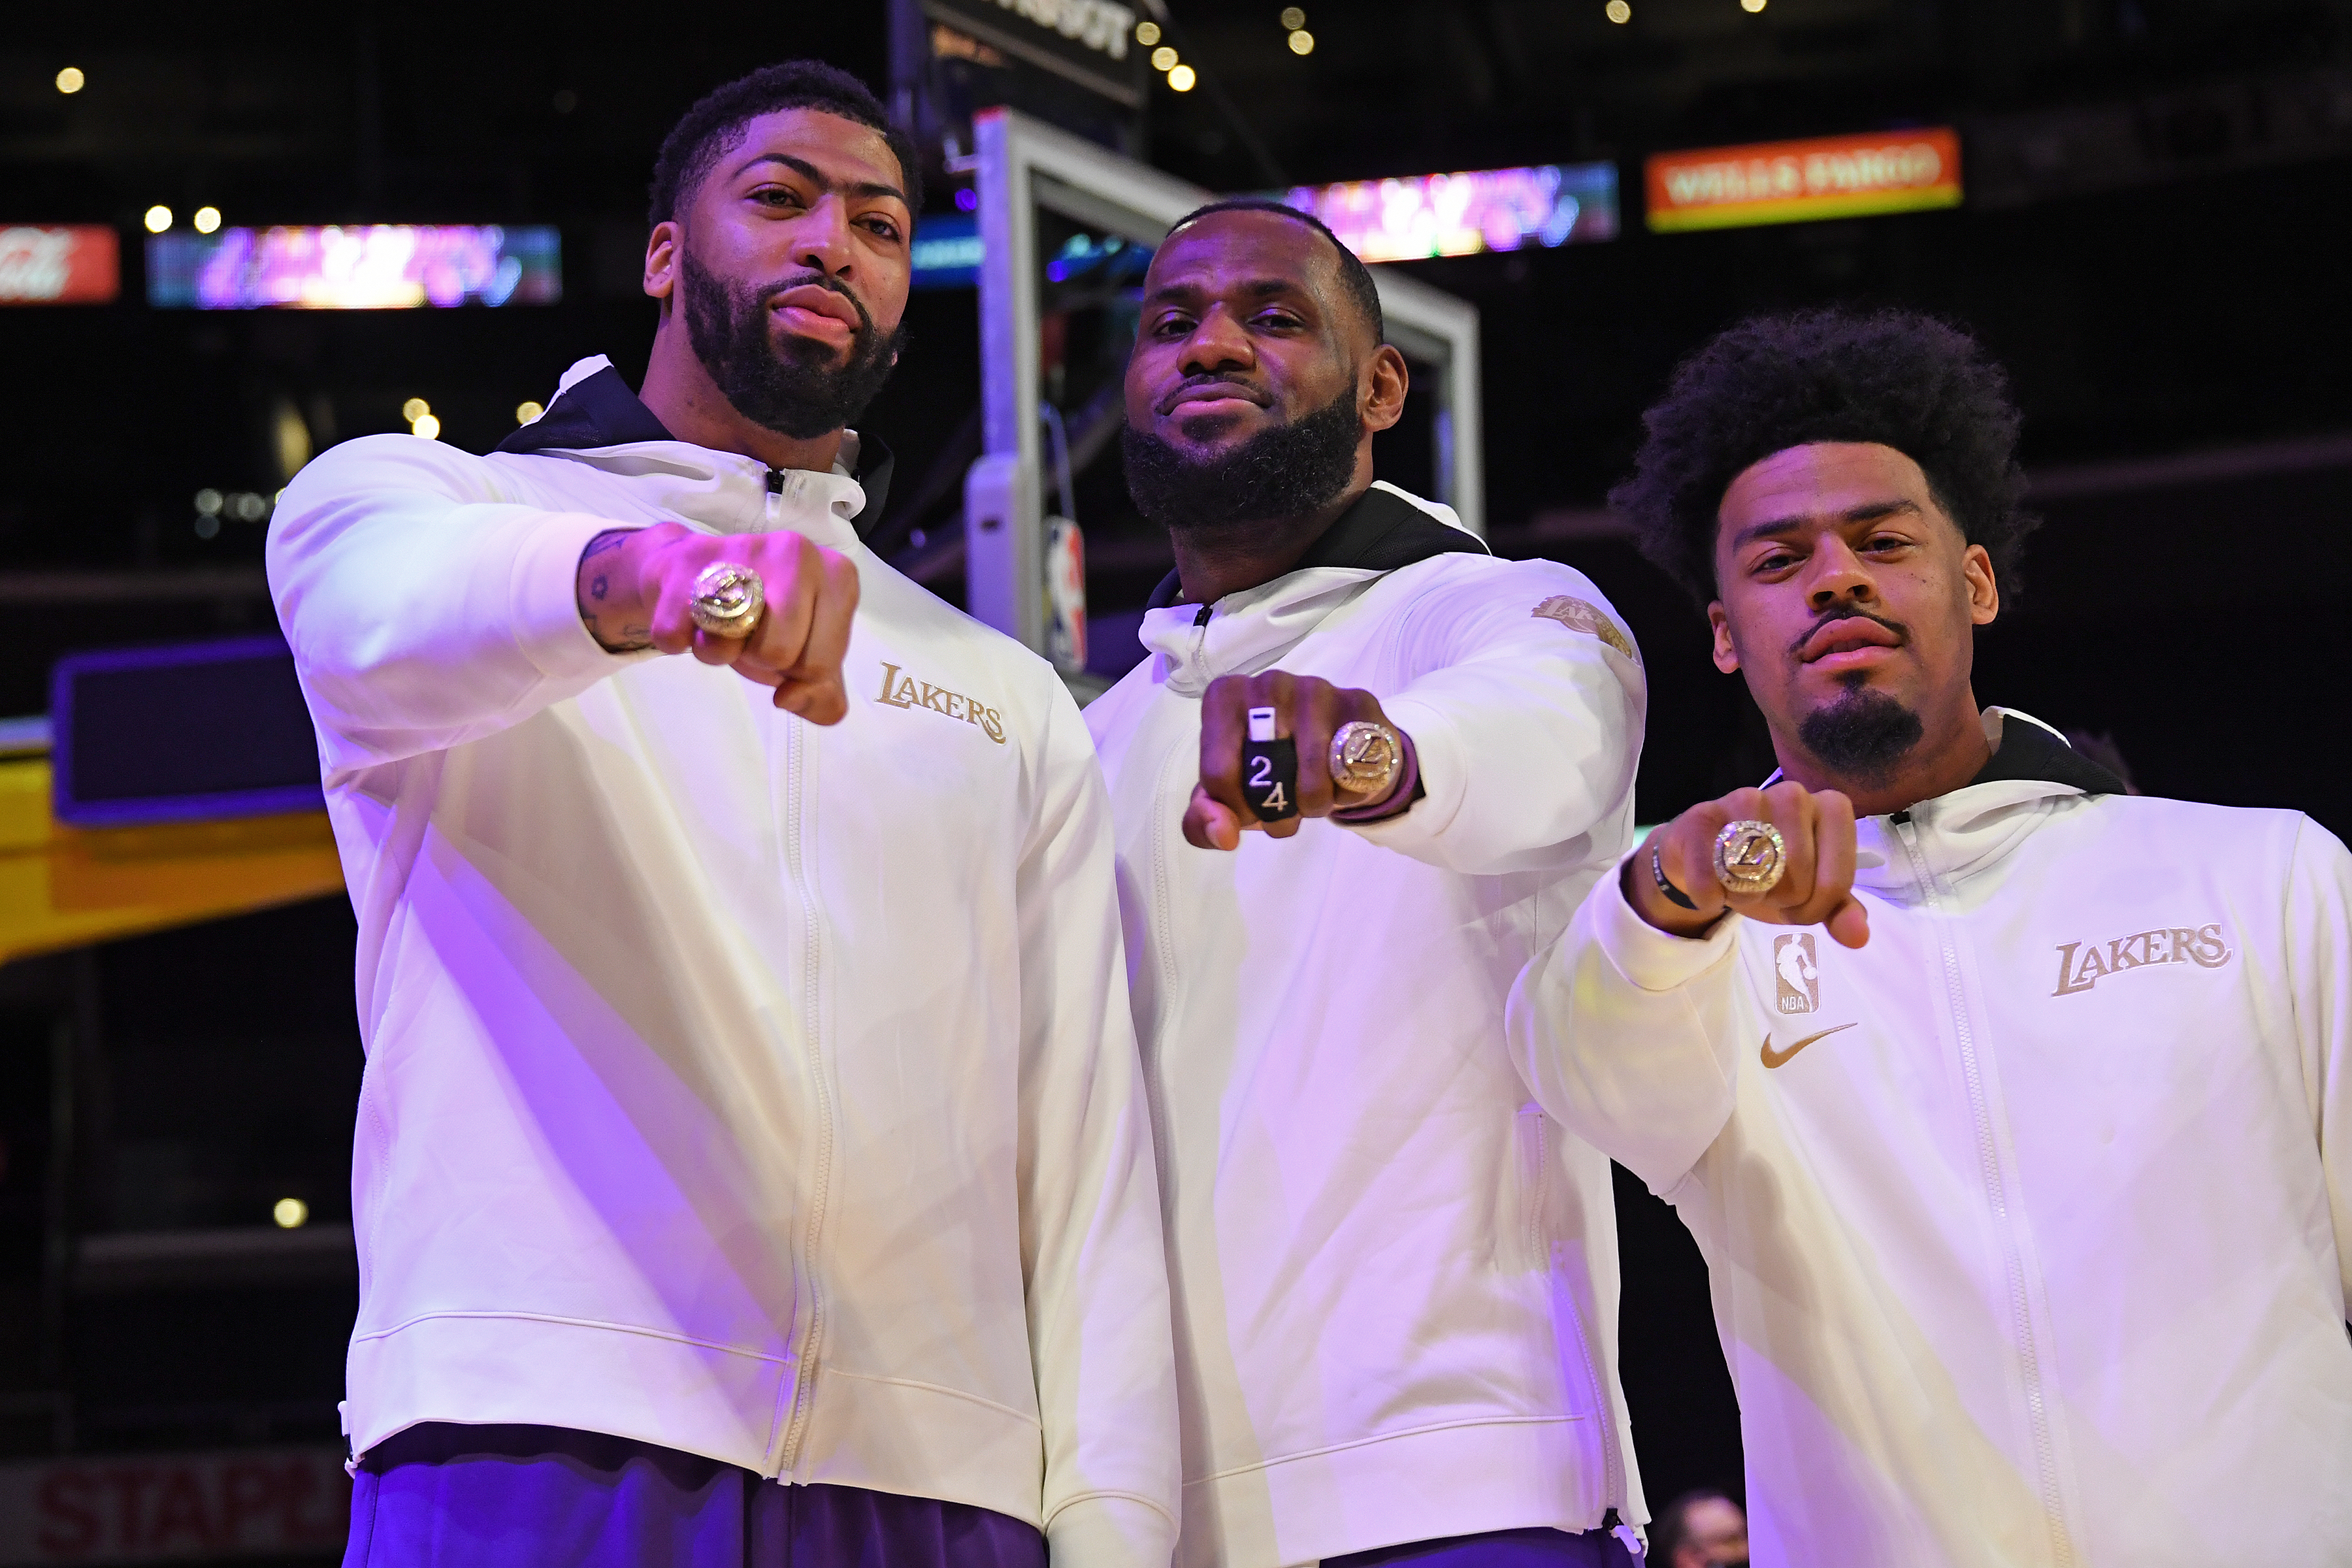 Lakers Championship: Share your memories of the 2020 season - Los